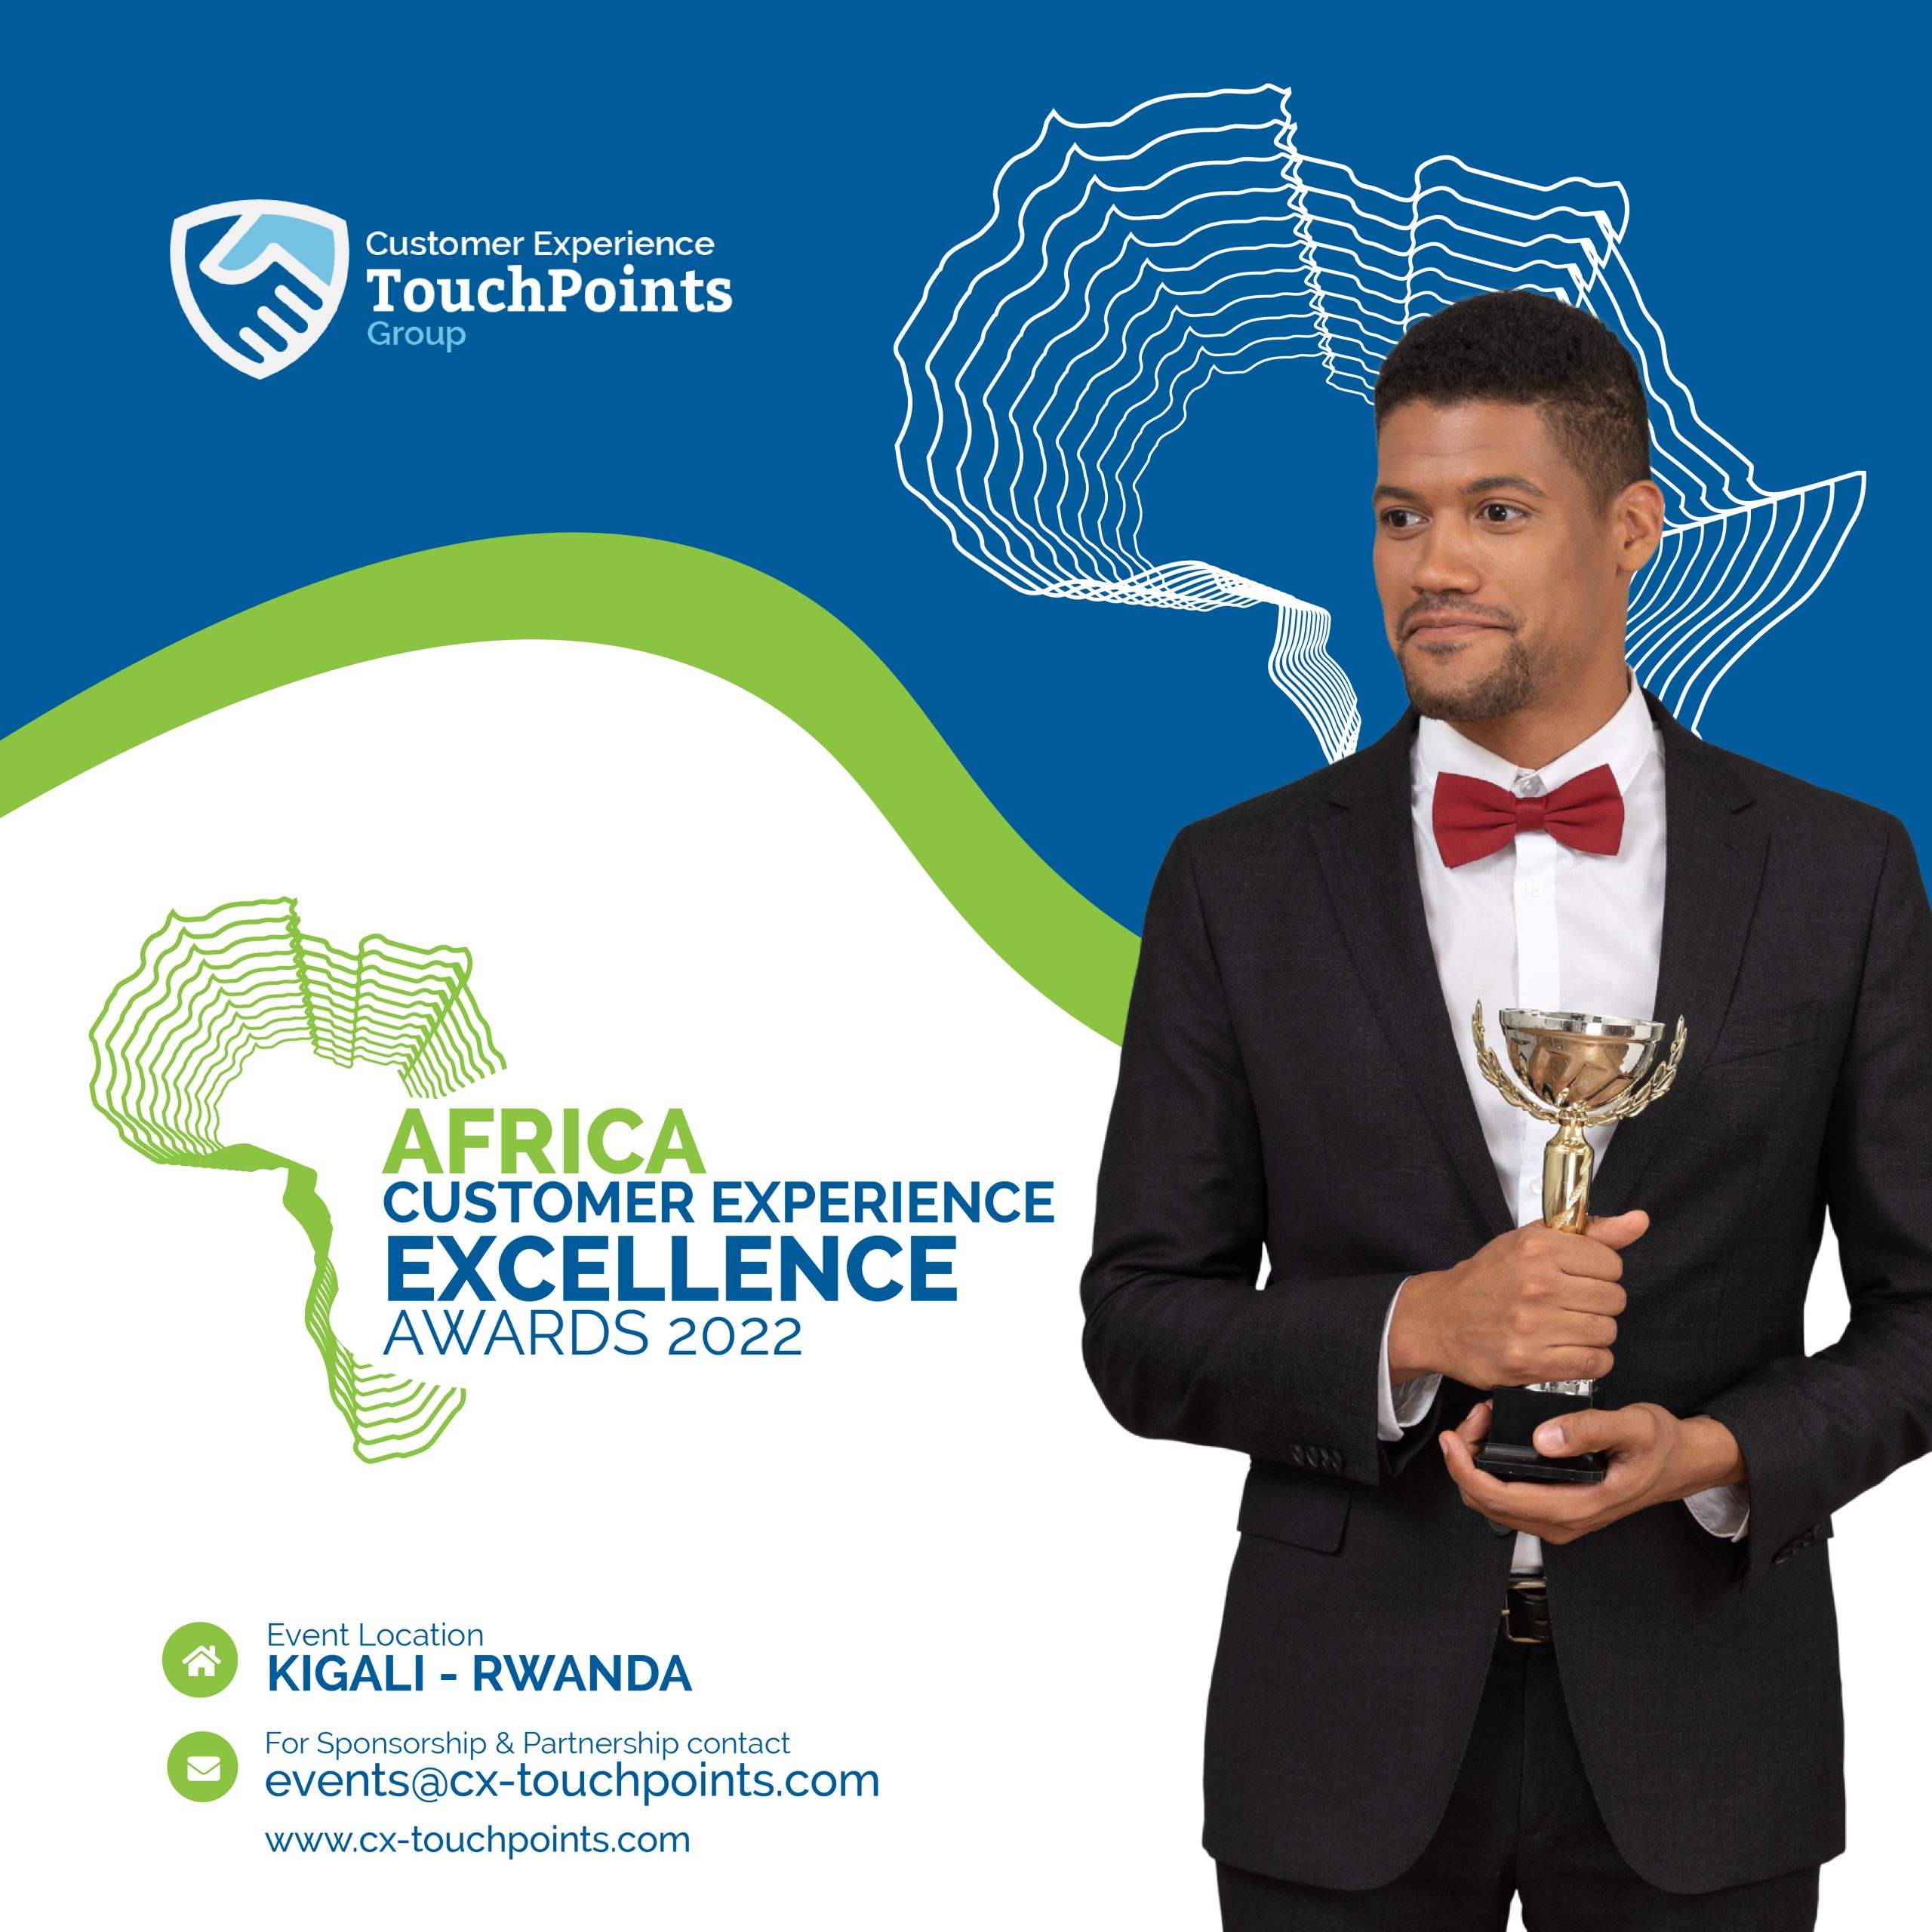 The Africa Customer Experience Excellence Awards